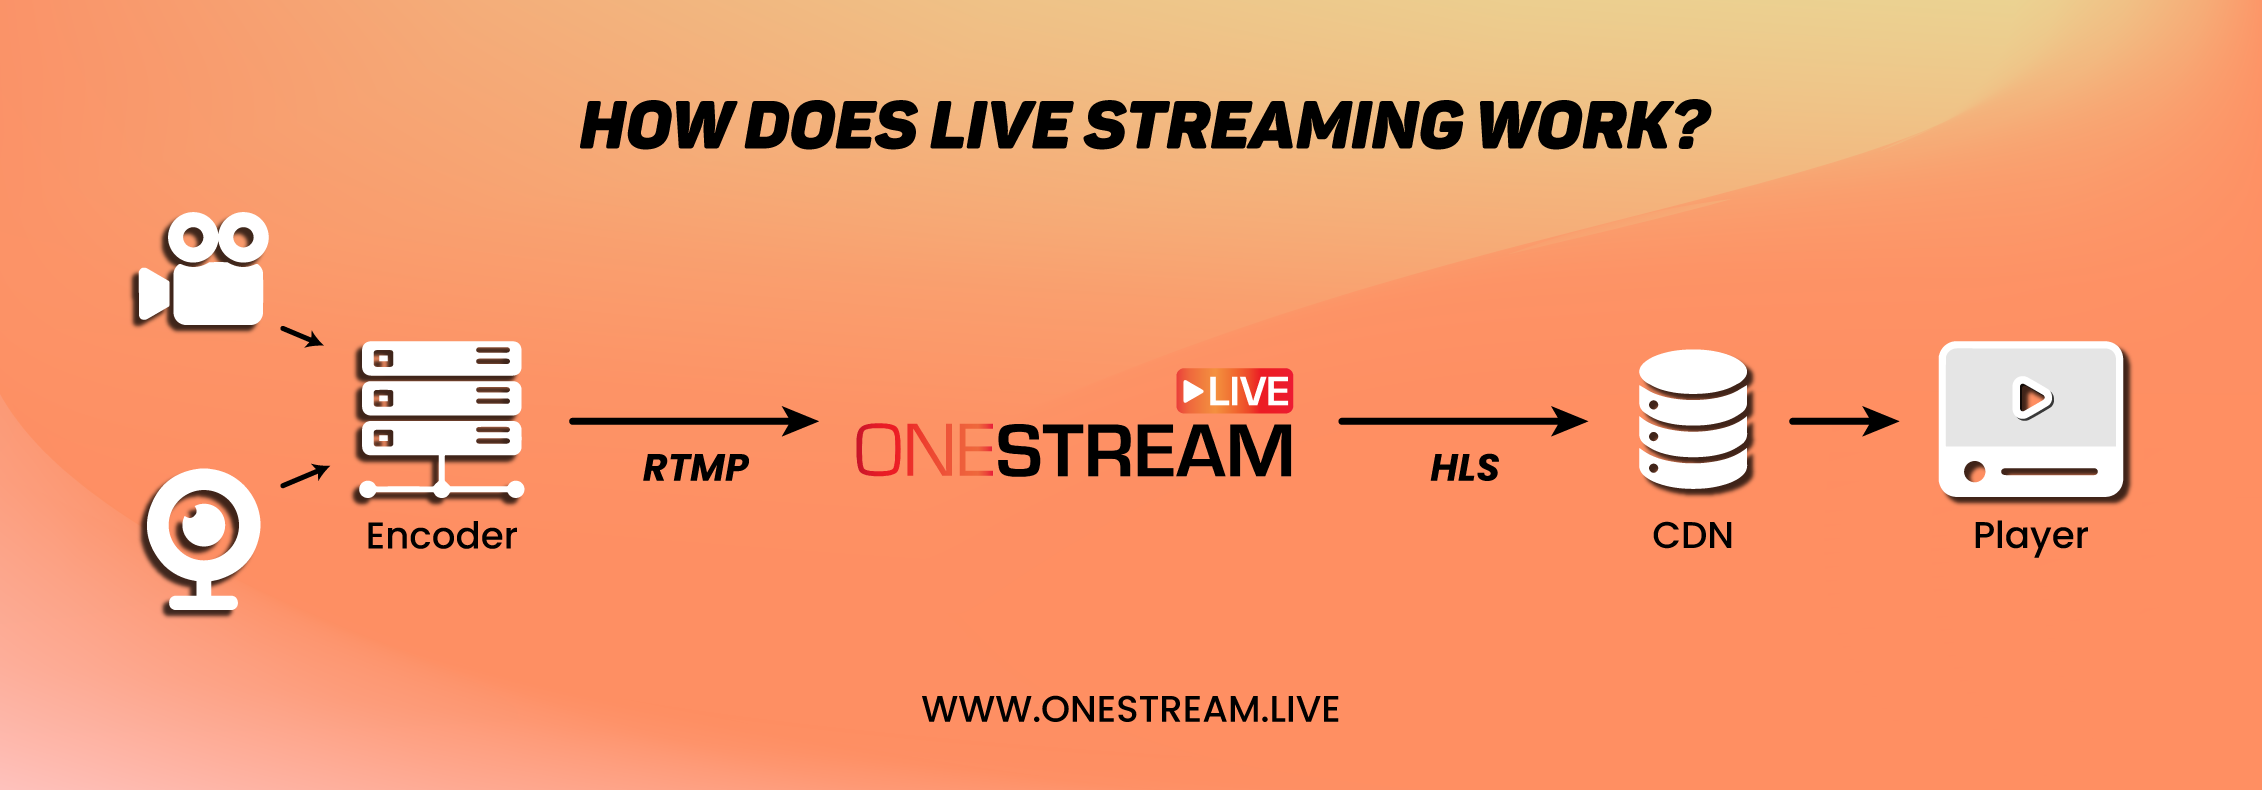 How does live streaming work?